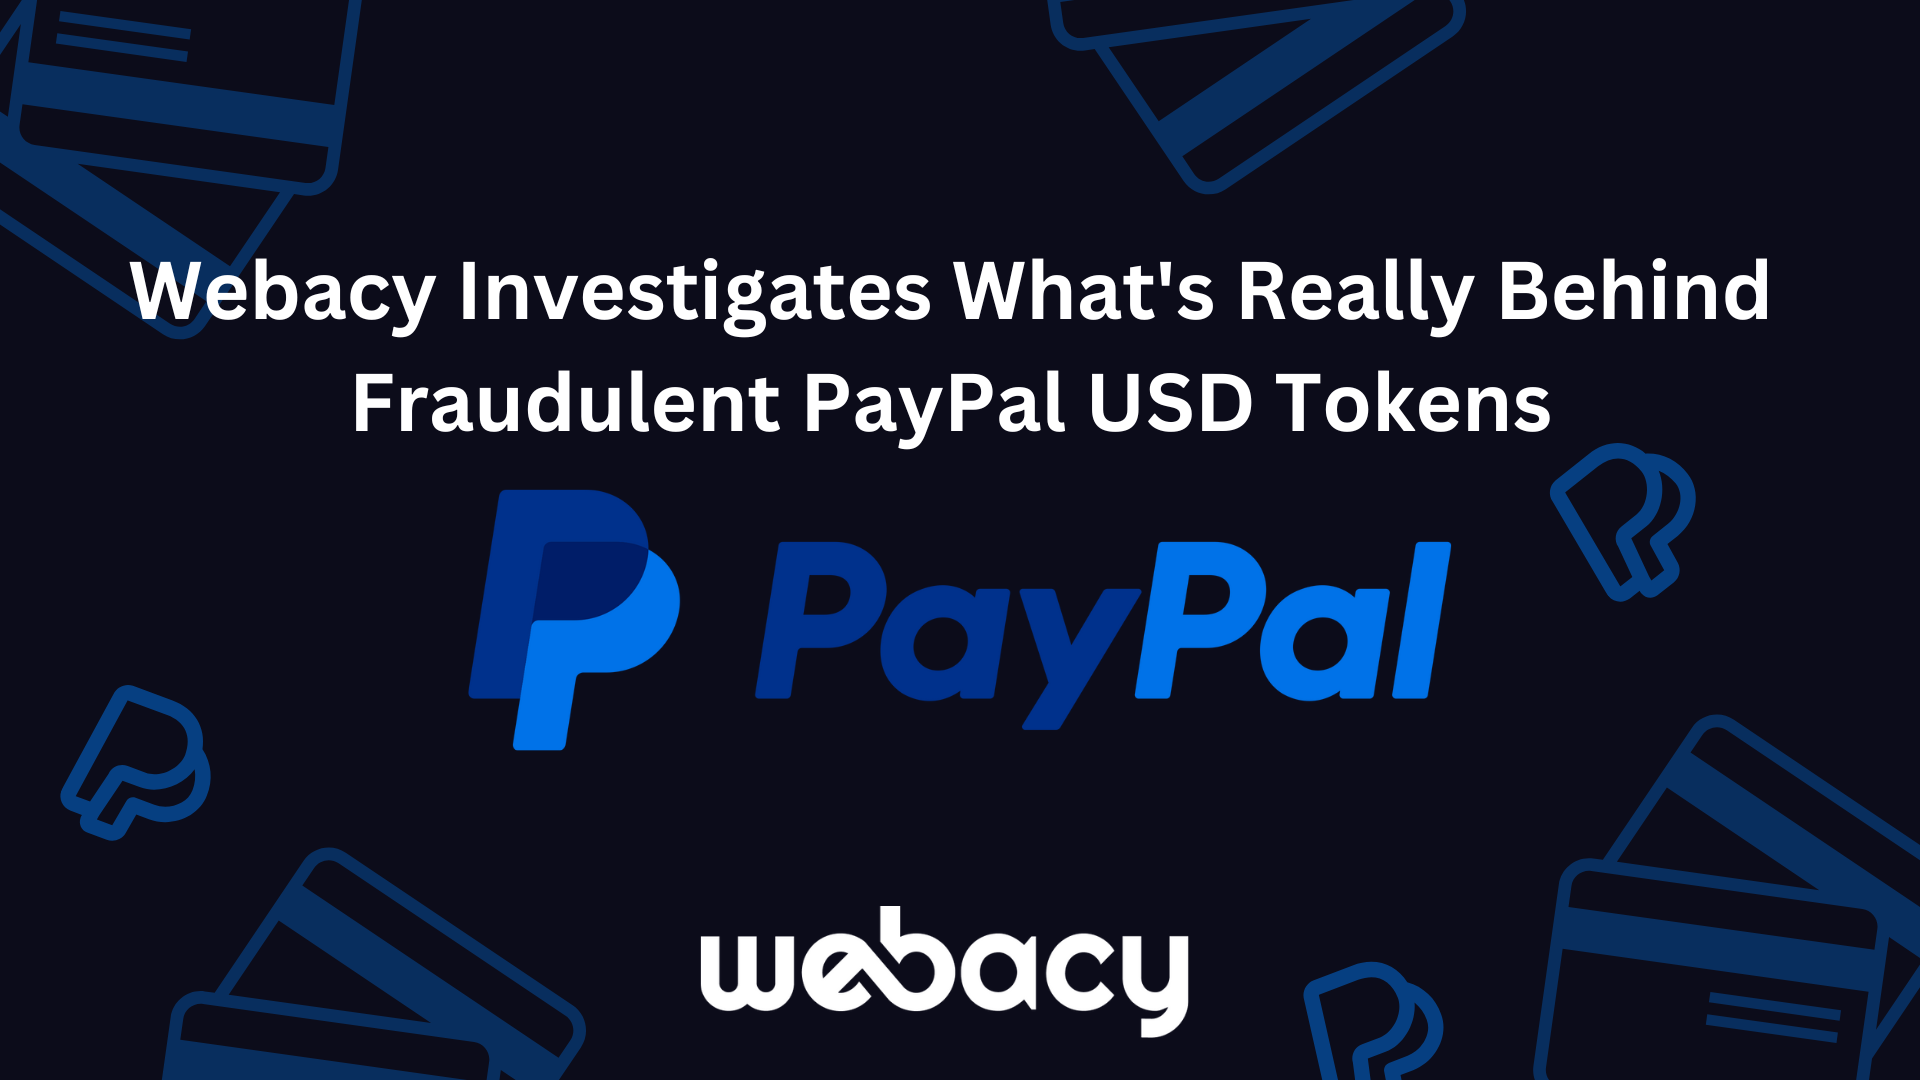 Webacy Investigates What's Really Behind Fraudulent PayPal USD Tokens